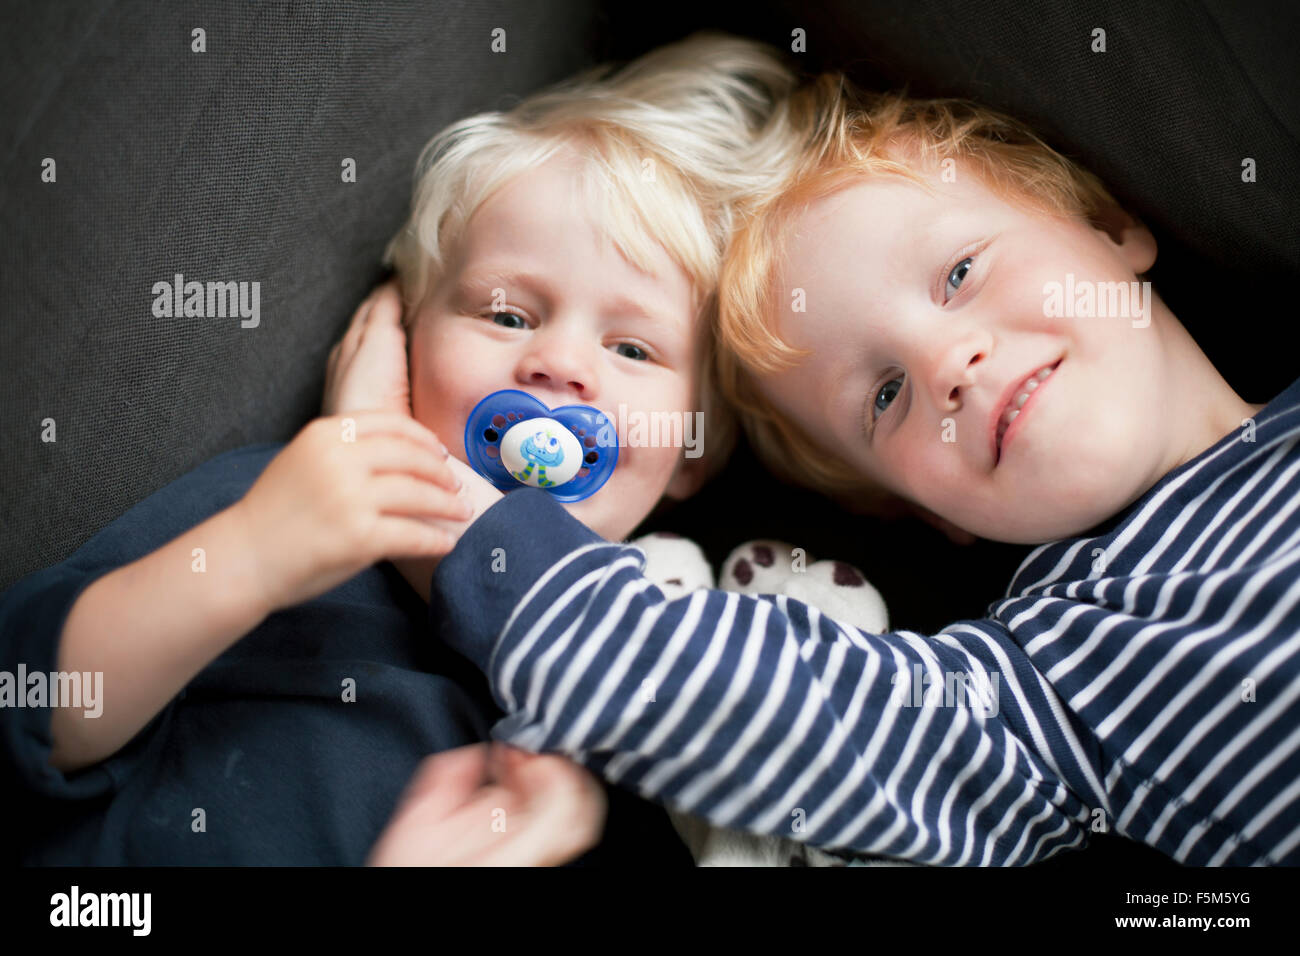 Sweden, Portrait of brothers (4-5, 6-7) Stock Photo